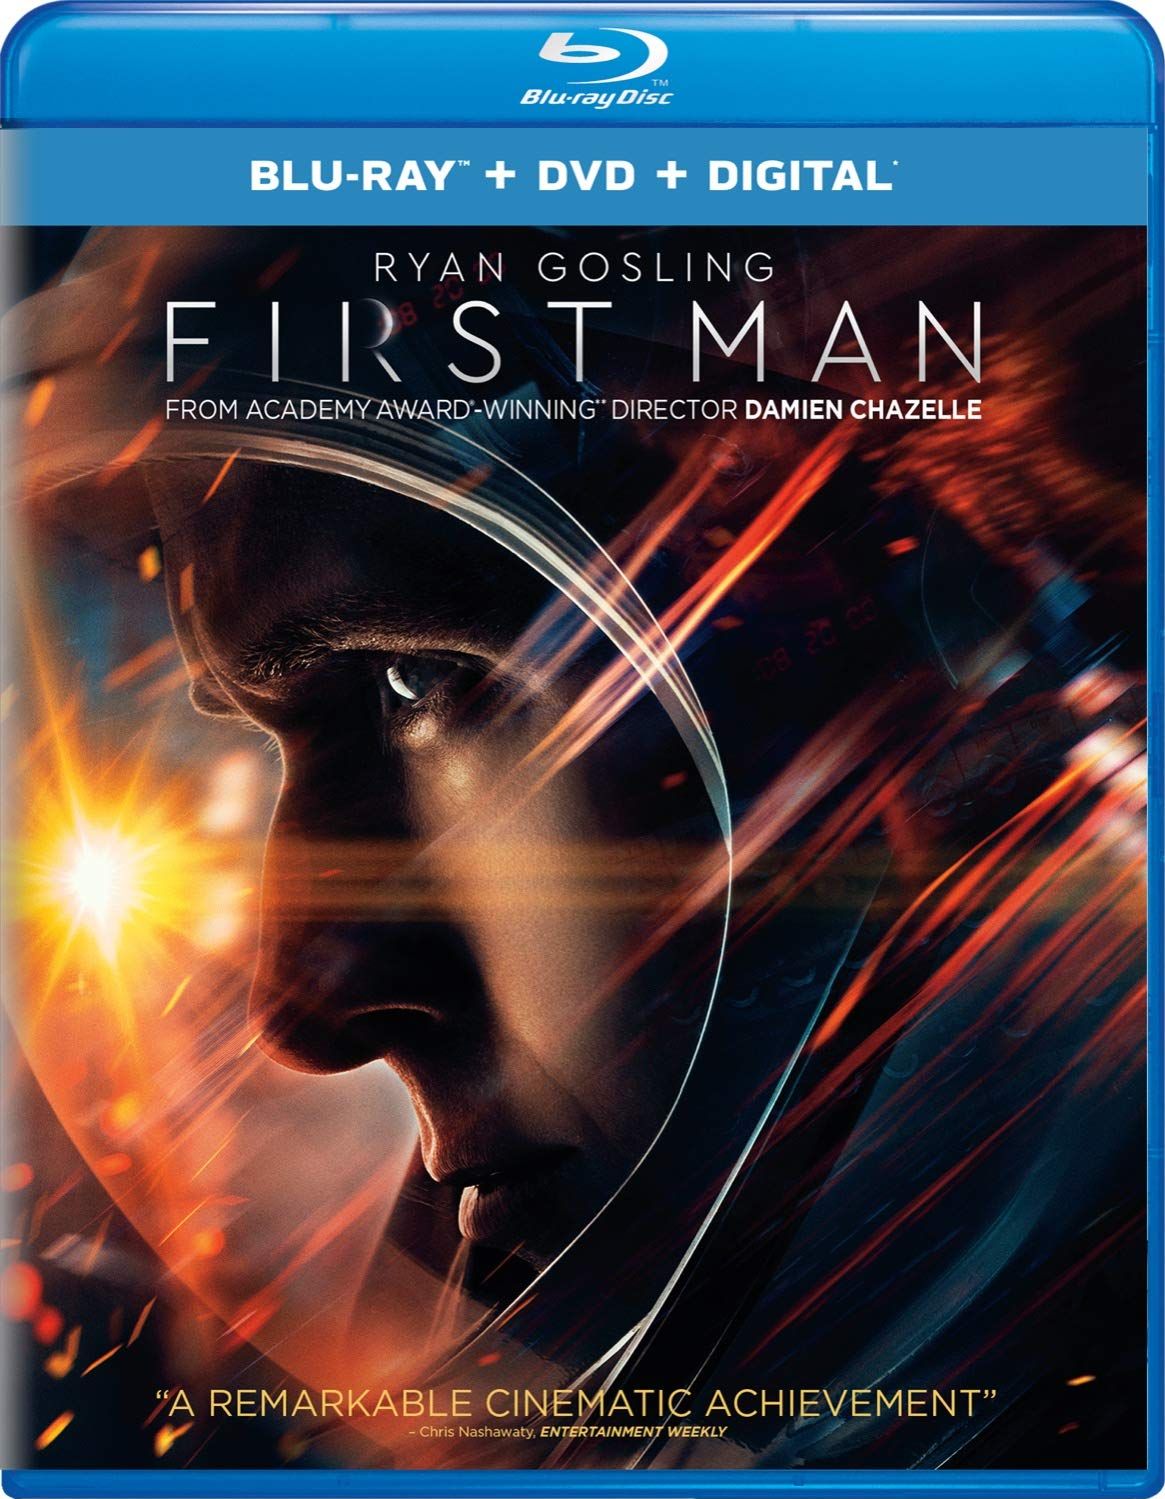 First Man DVD Release Date January 22, 2019